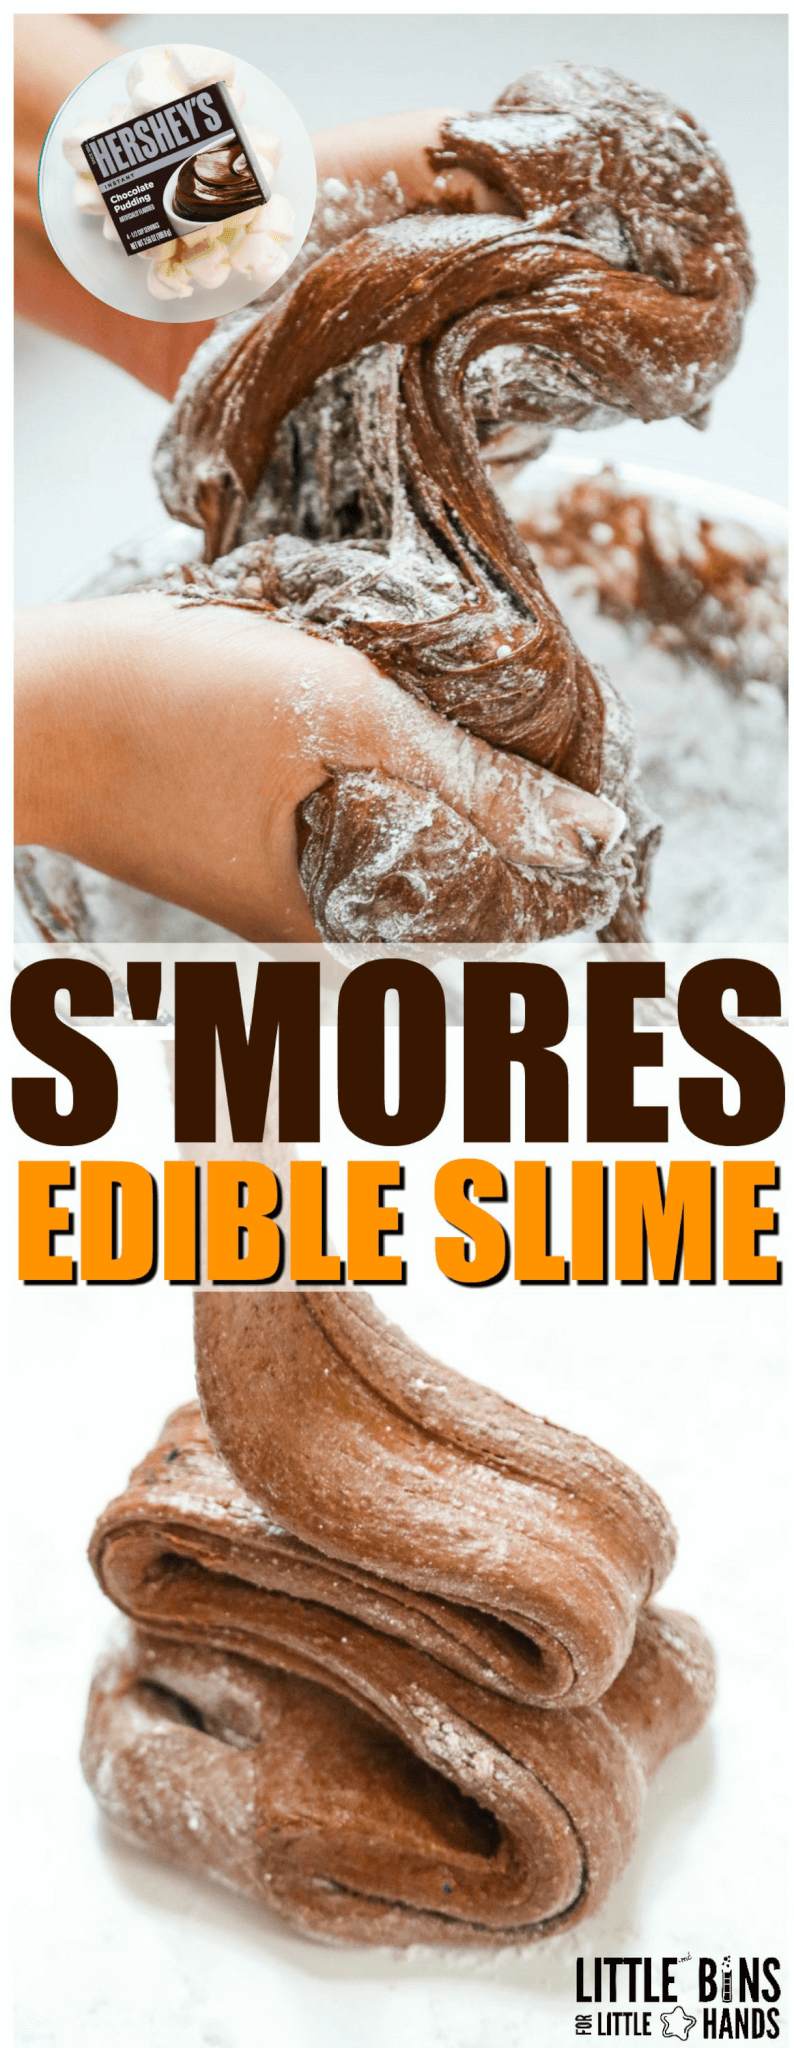 Our 3 ingredient edible chocolate slime recipe is going to blow your kid's mind. Why is that? Because we paired it with a s'mores theme for amazing sensory play that's completely edible. As a little twist, we are going to make this edible chocolate slime without condensed milk and without cornstarch. What do we add instead, read below and learn how to make edible chocolate slime recipes with the kids right now! Edible slime is perfect for kids of all ages.